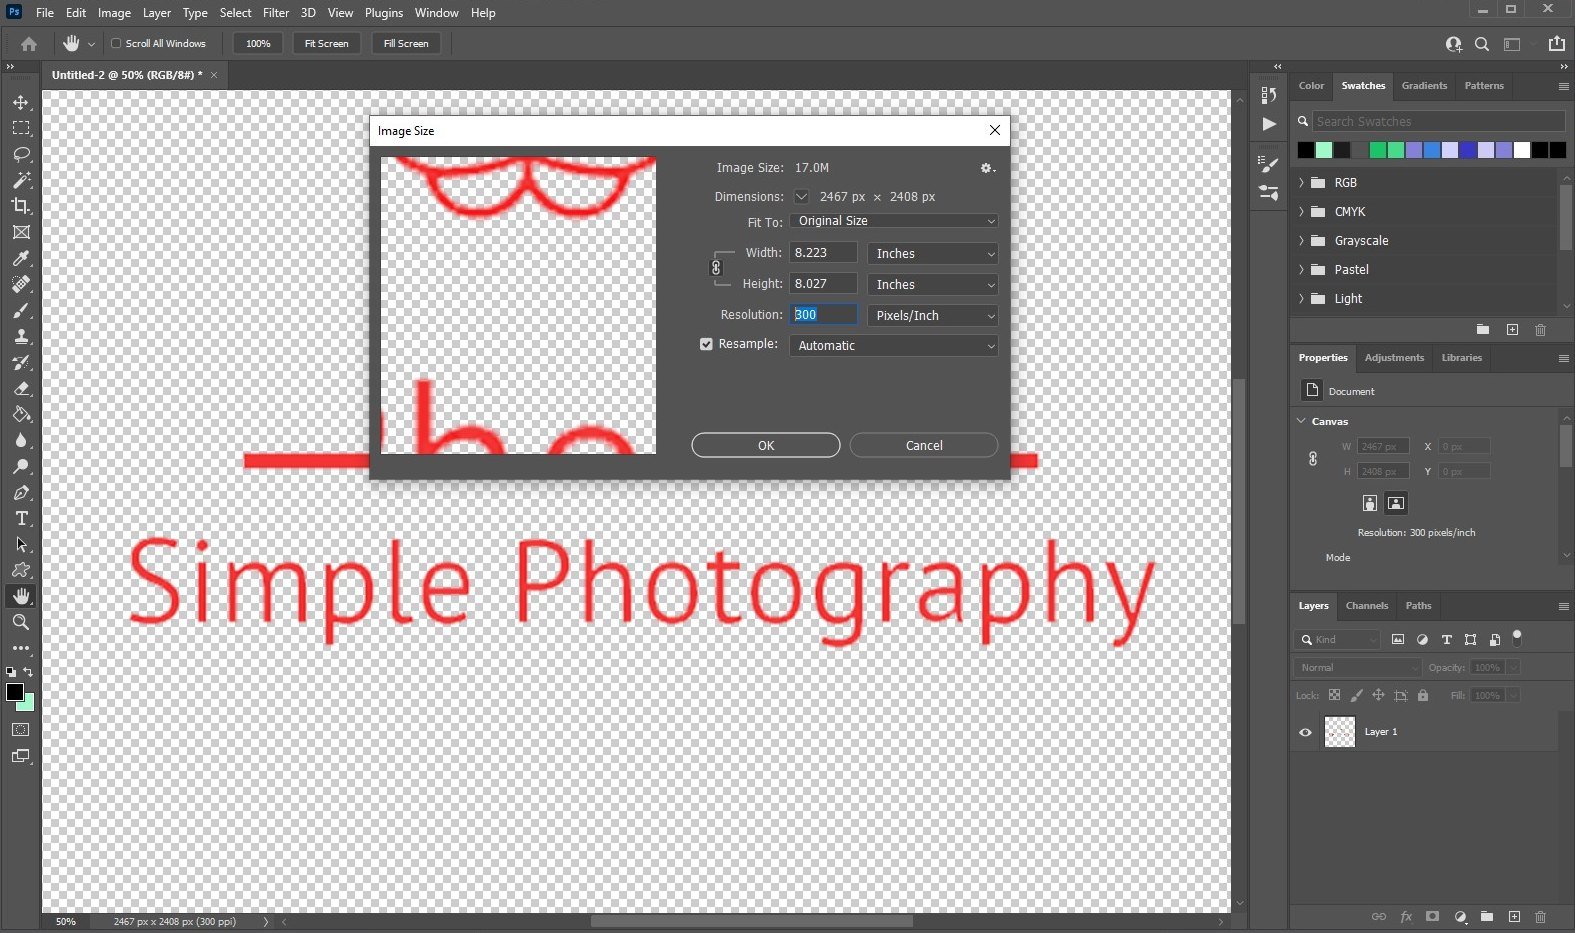 vectorize image in photoshop - 1